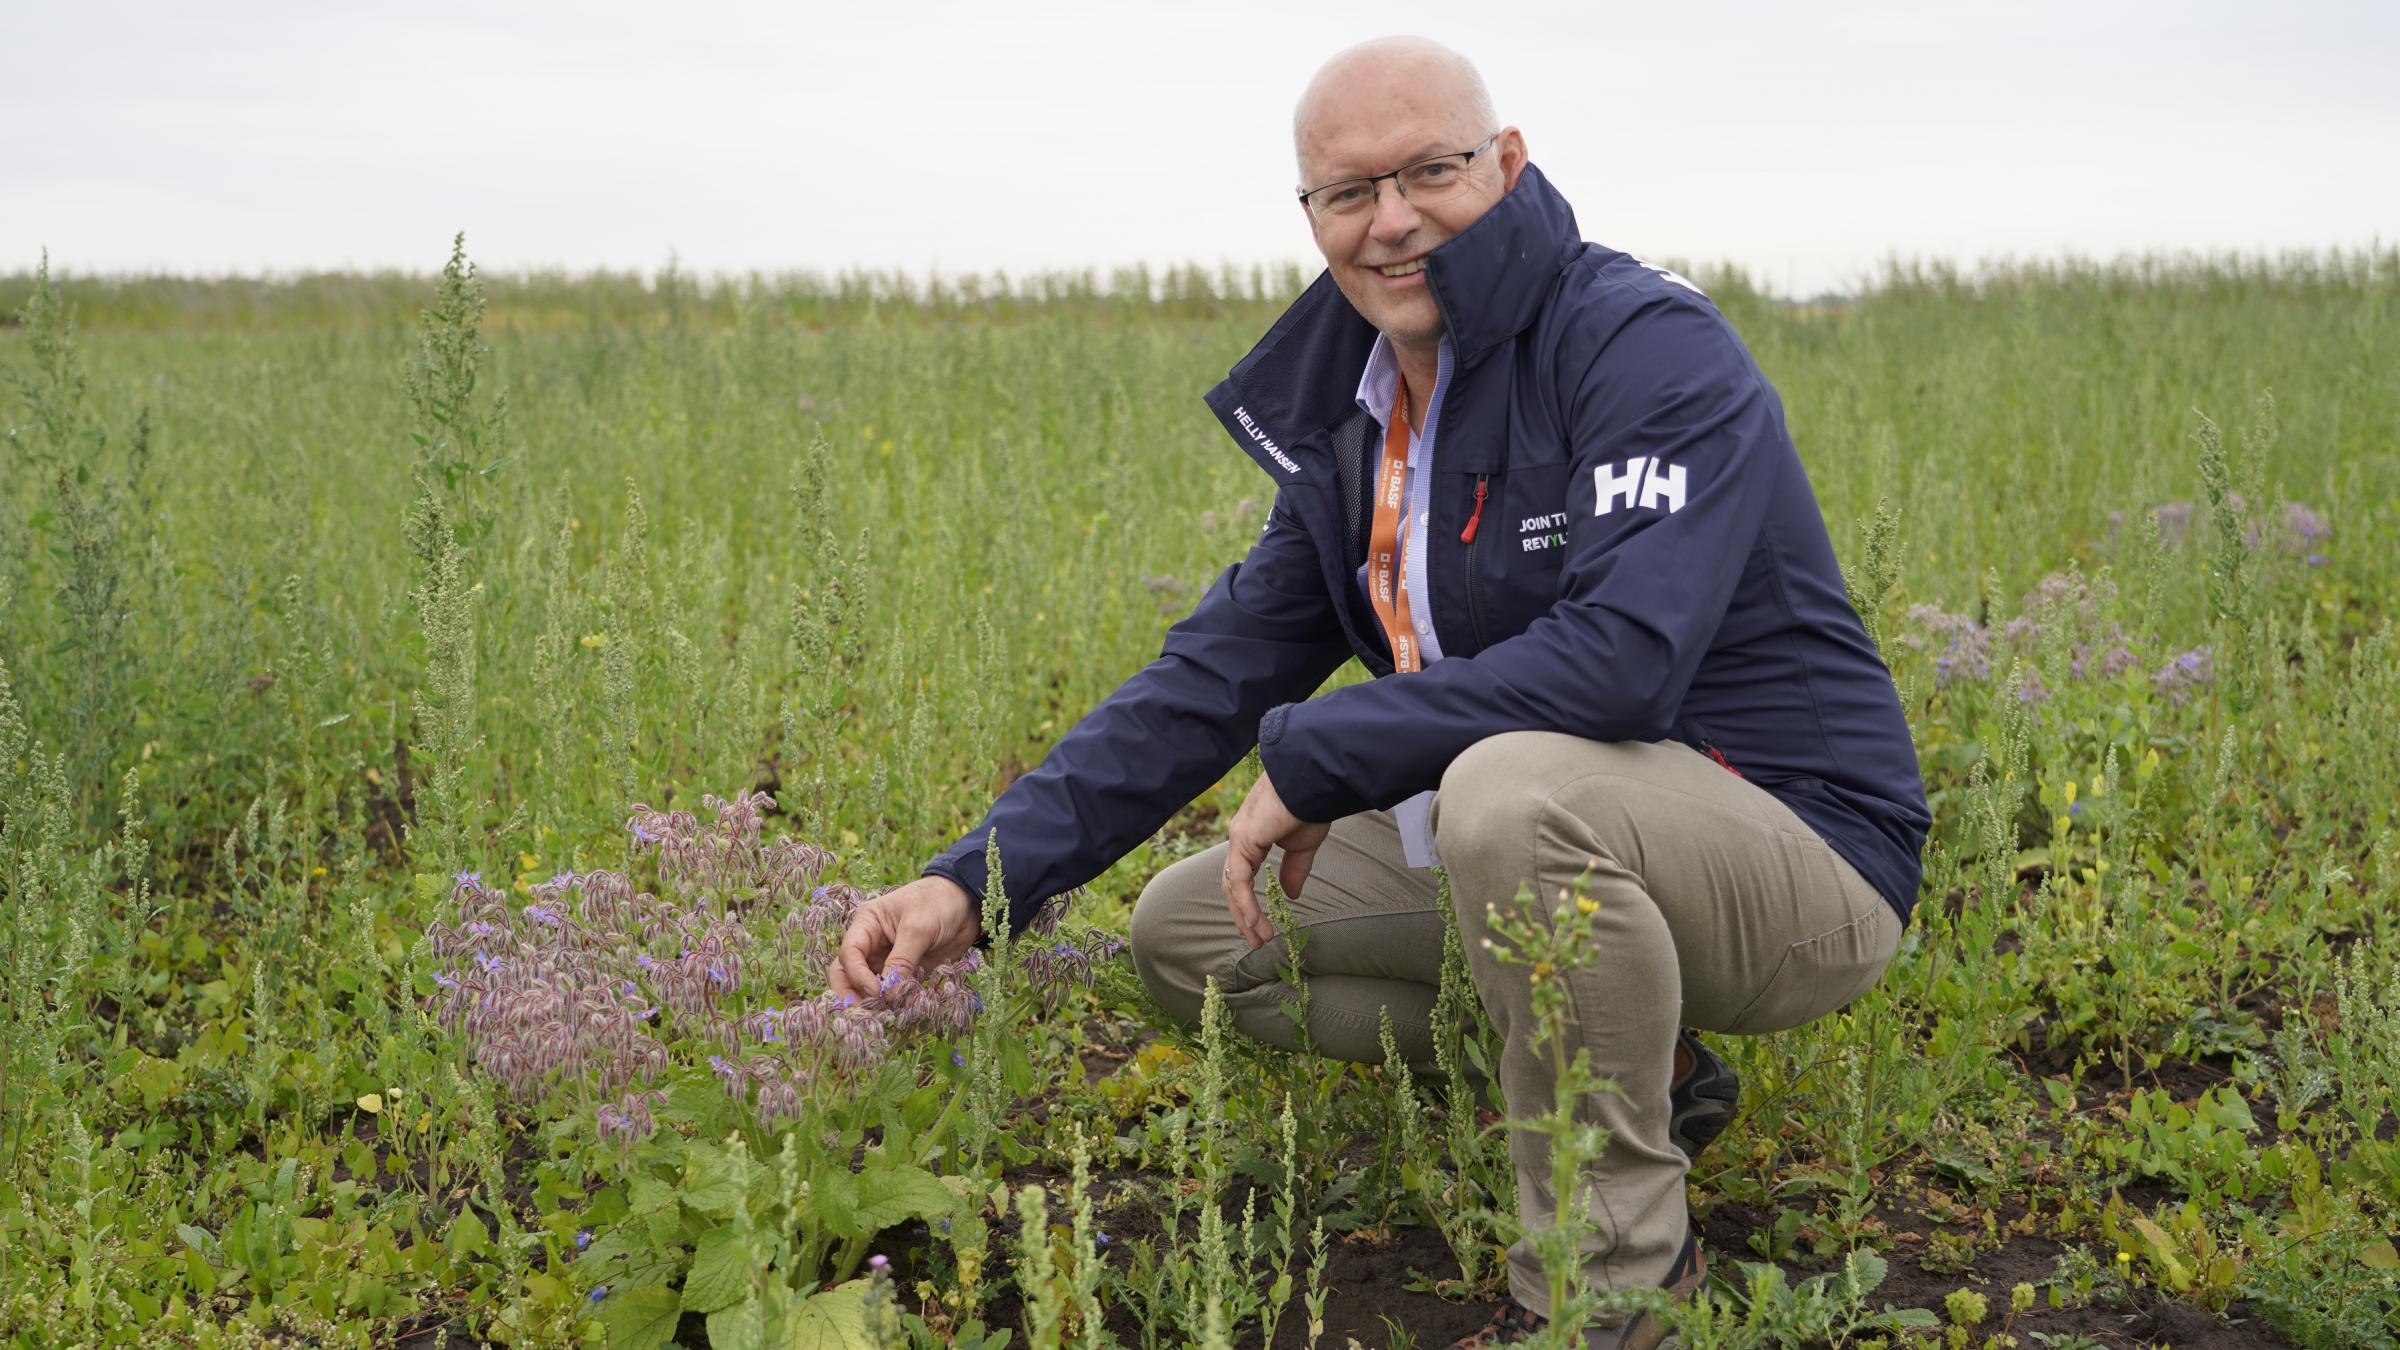 BASF agricultural sustainability manager, Mike Green